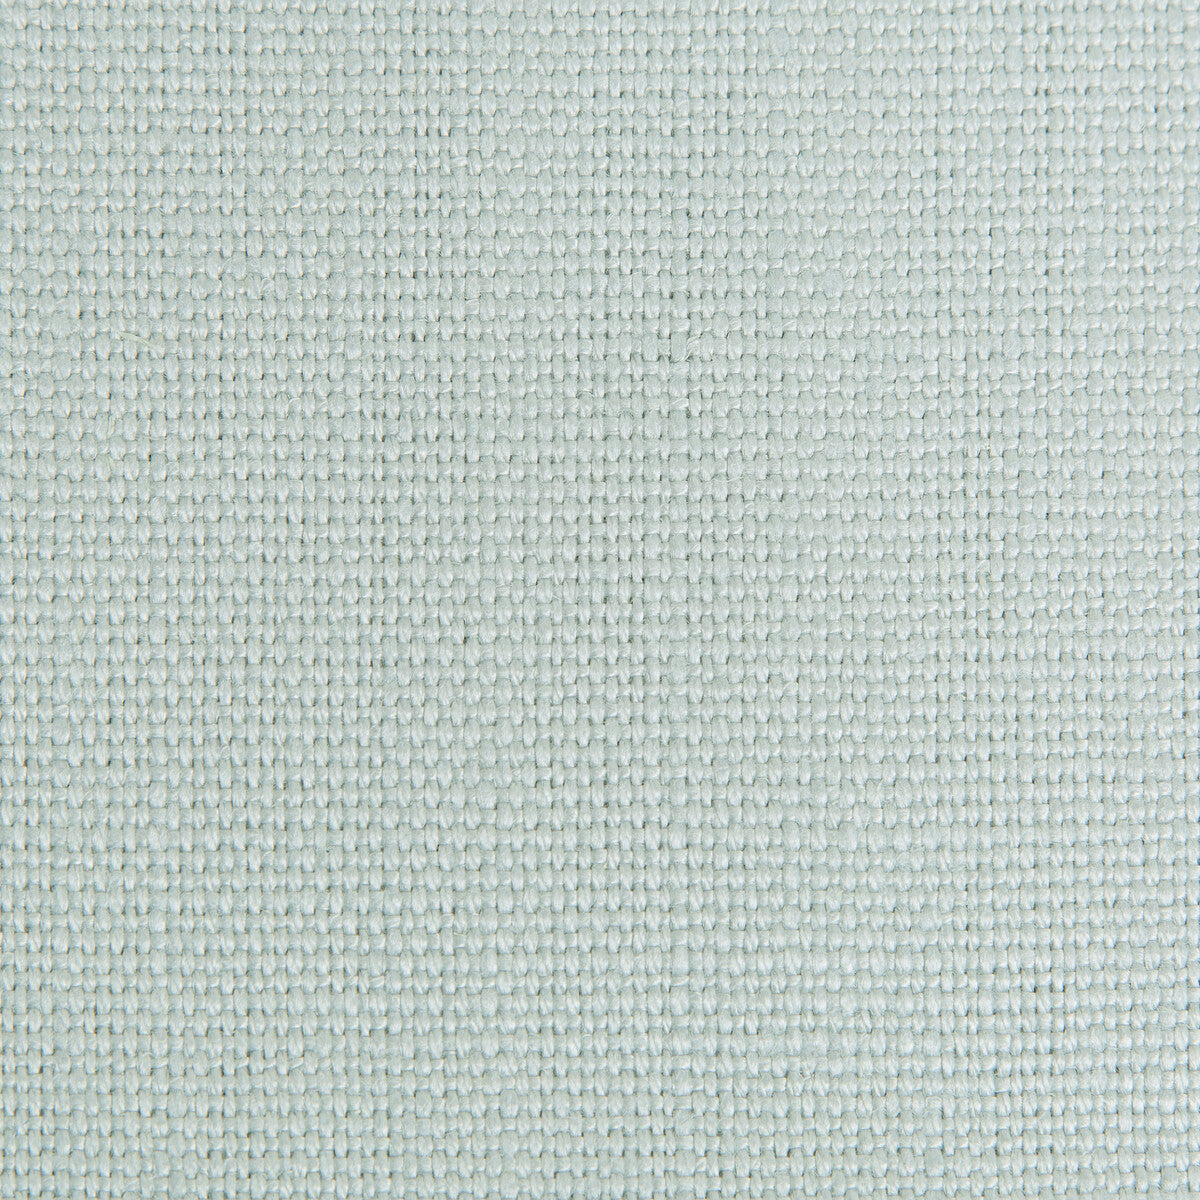 Hampton Linen fabric in seaside color - pattern 2012171.1501.0 - by Lee Jofa in the The Complete Linen IV collection